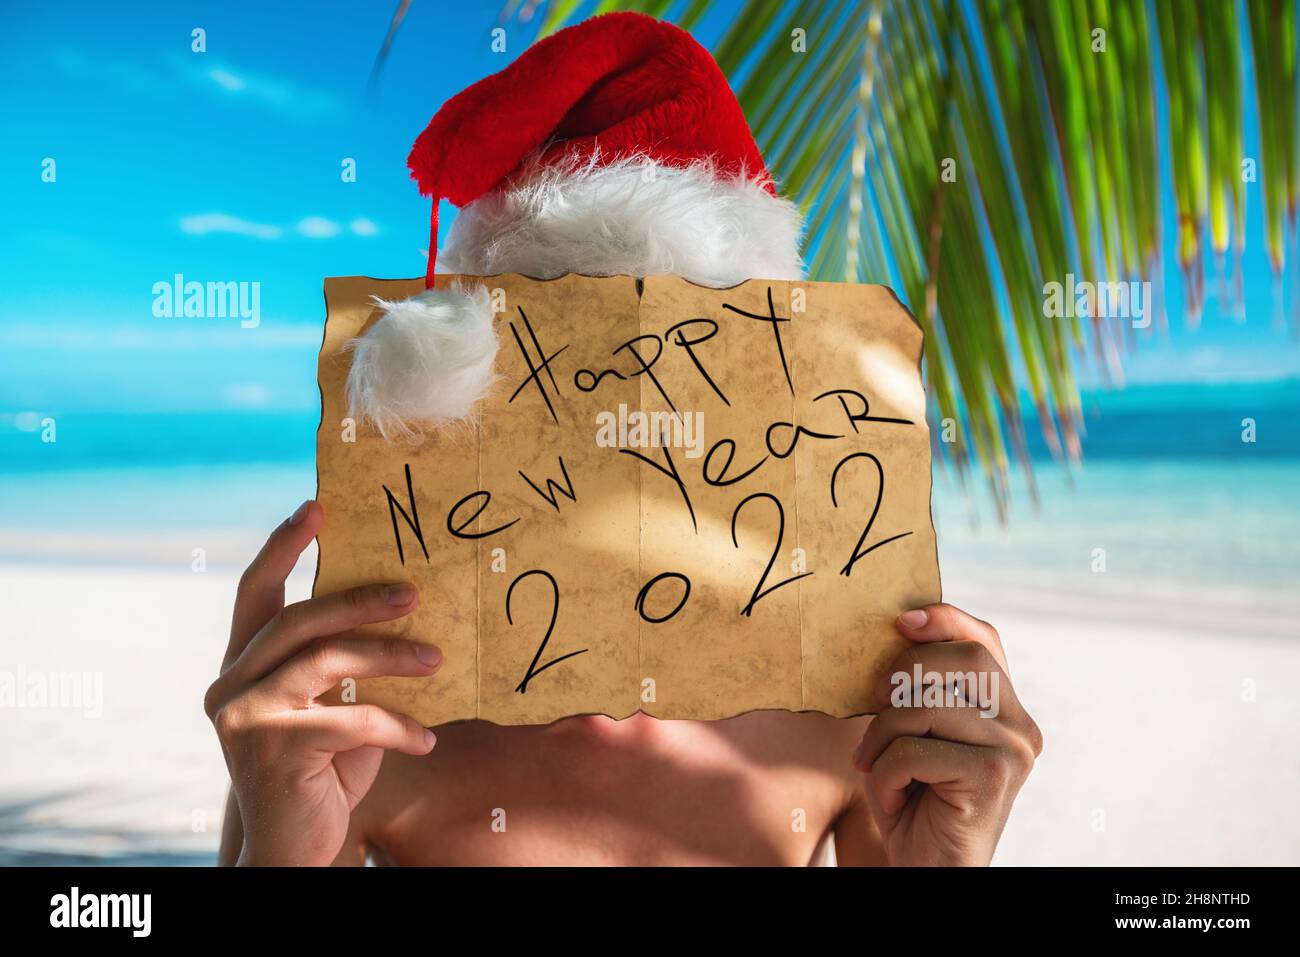 Happy new year 2022 Tourist man with Santa Claus hat relaxing on tropical island beach. Punta Cana, Dominican Republic. Stock Photo